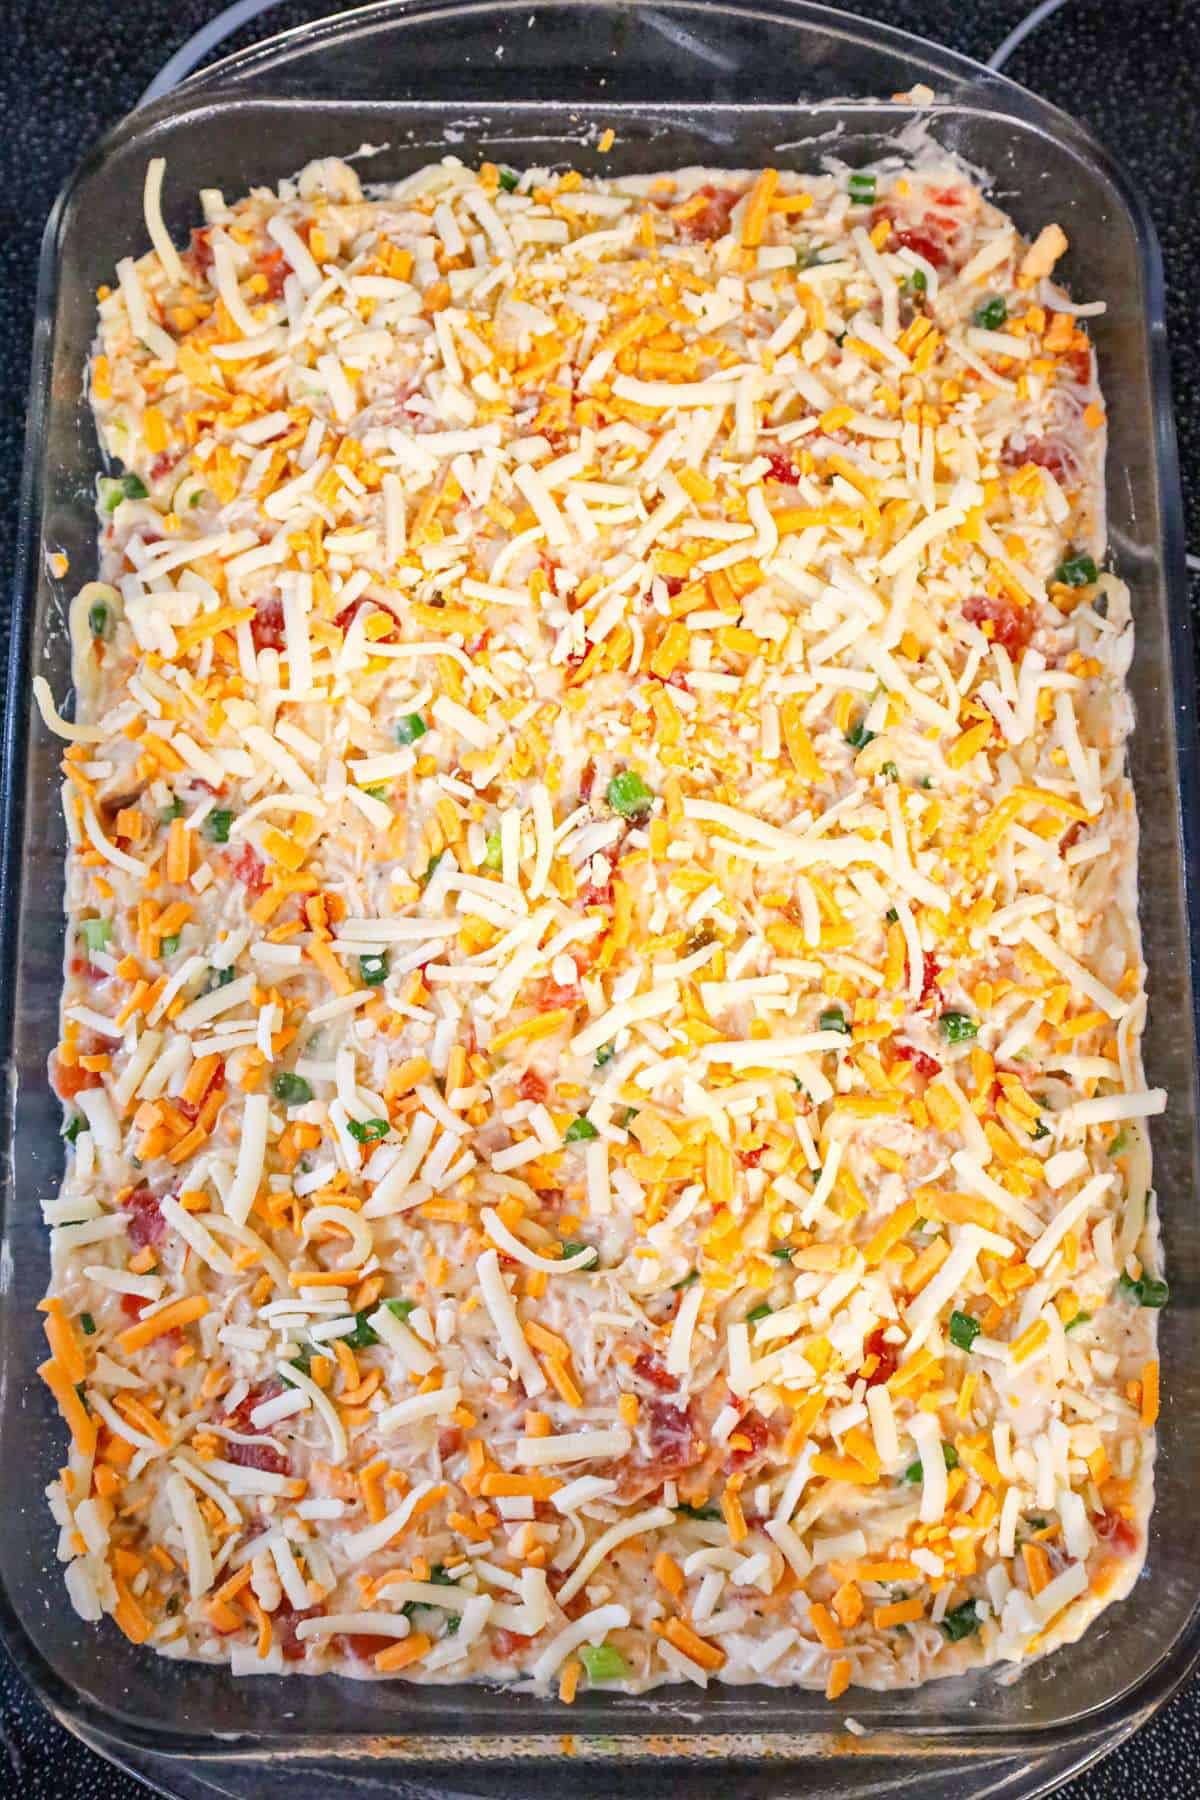 shredded cheese on top of spaghetti with rotel in a baking dish